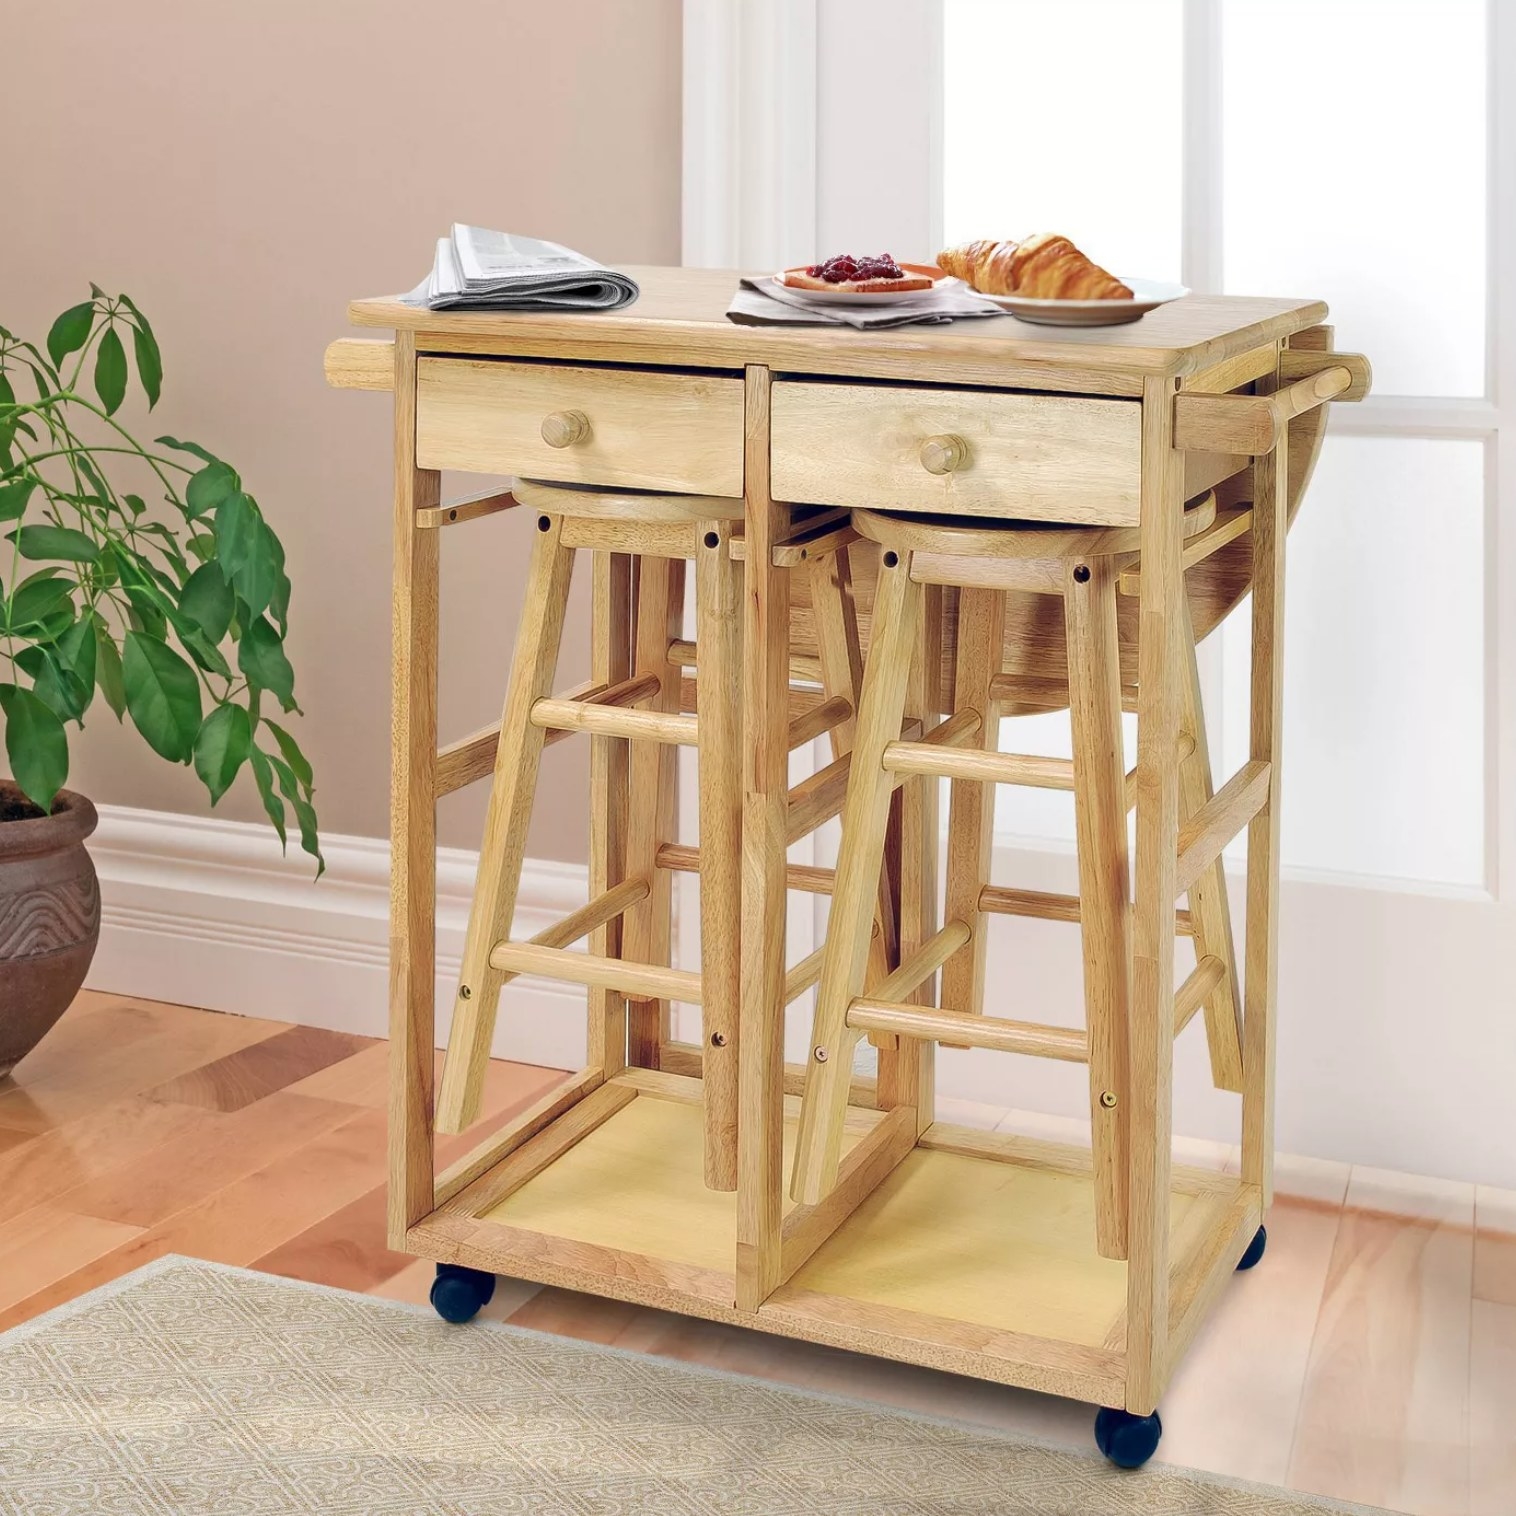 The table and stool set with wheels